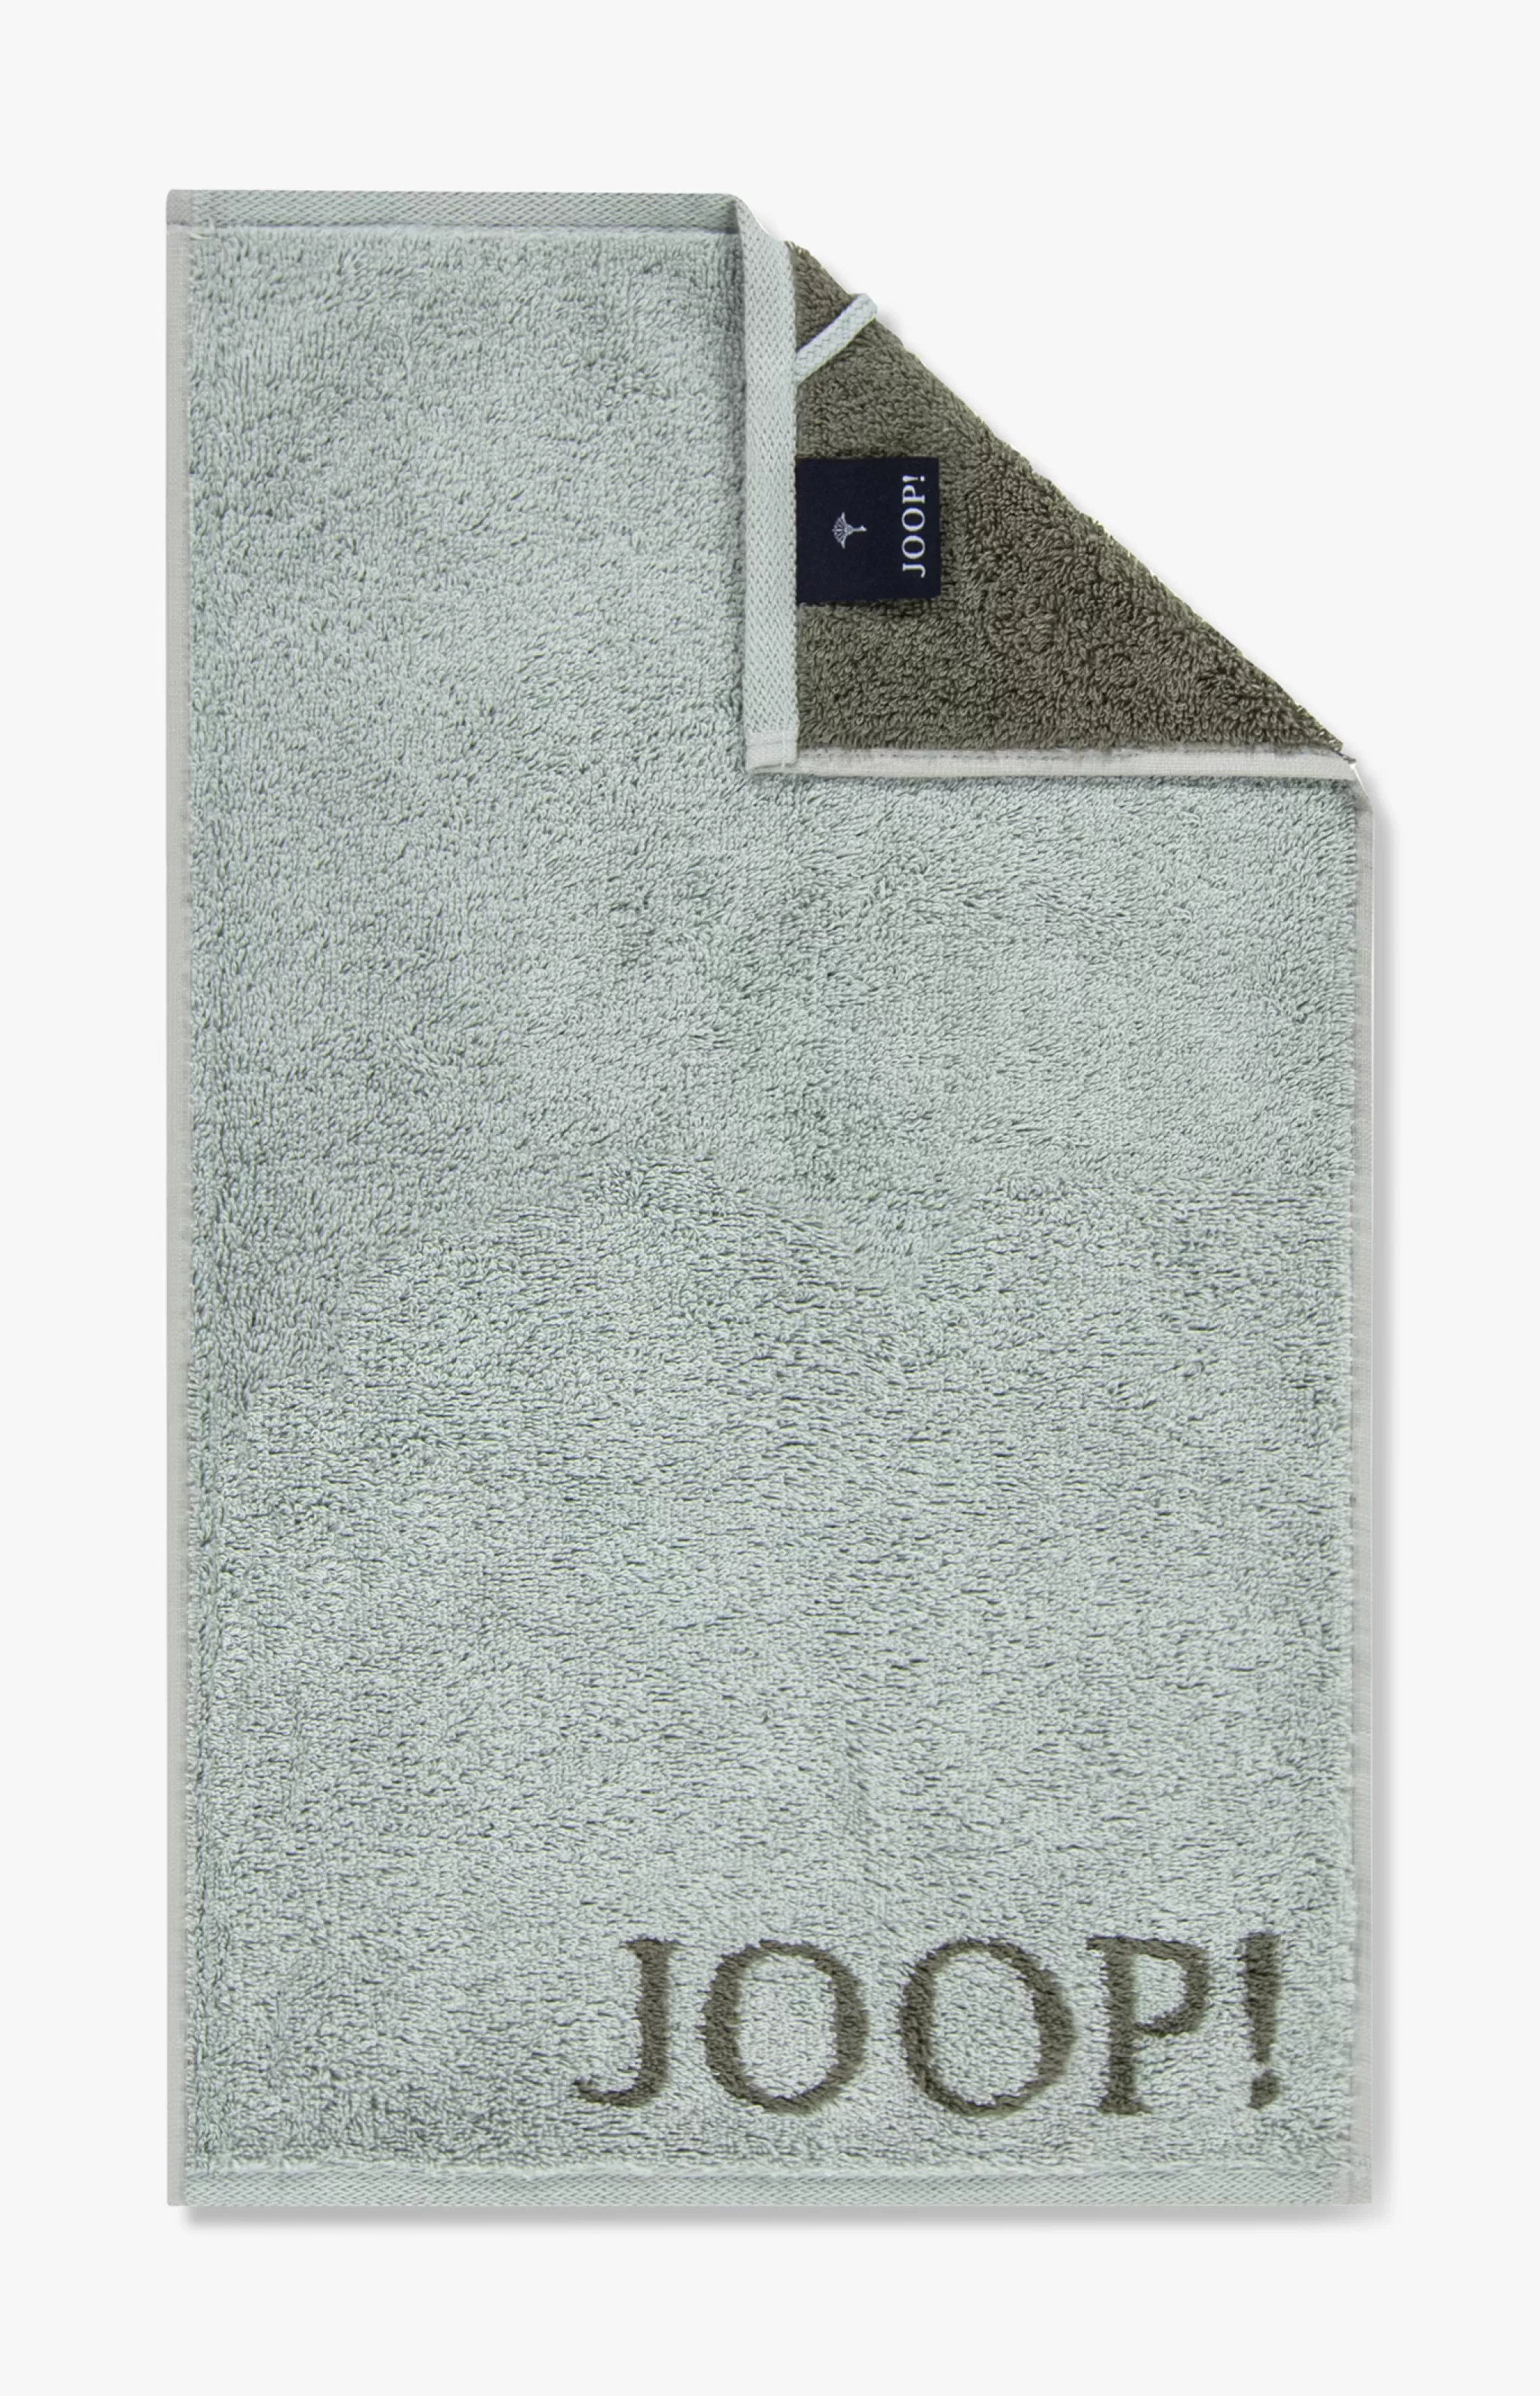 - Guest Towel | Discover Everything*JOOP - Guest Towel | Discover Everything Classic Doubleface fryer series,